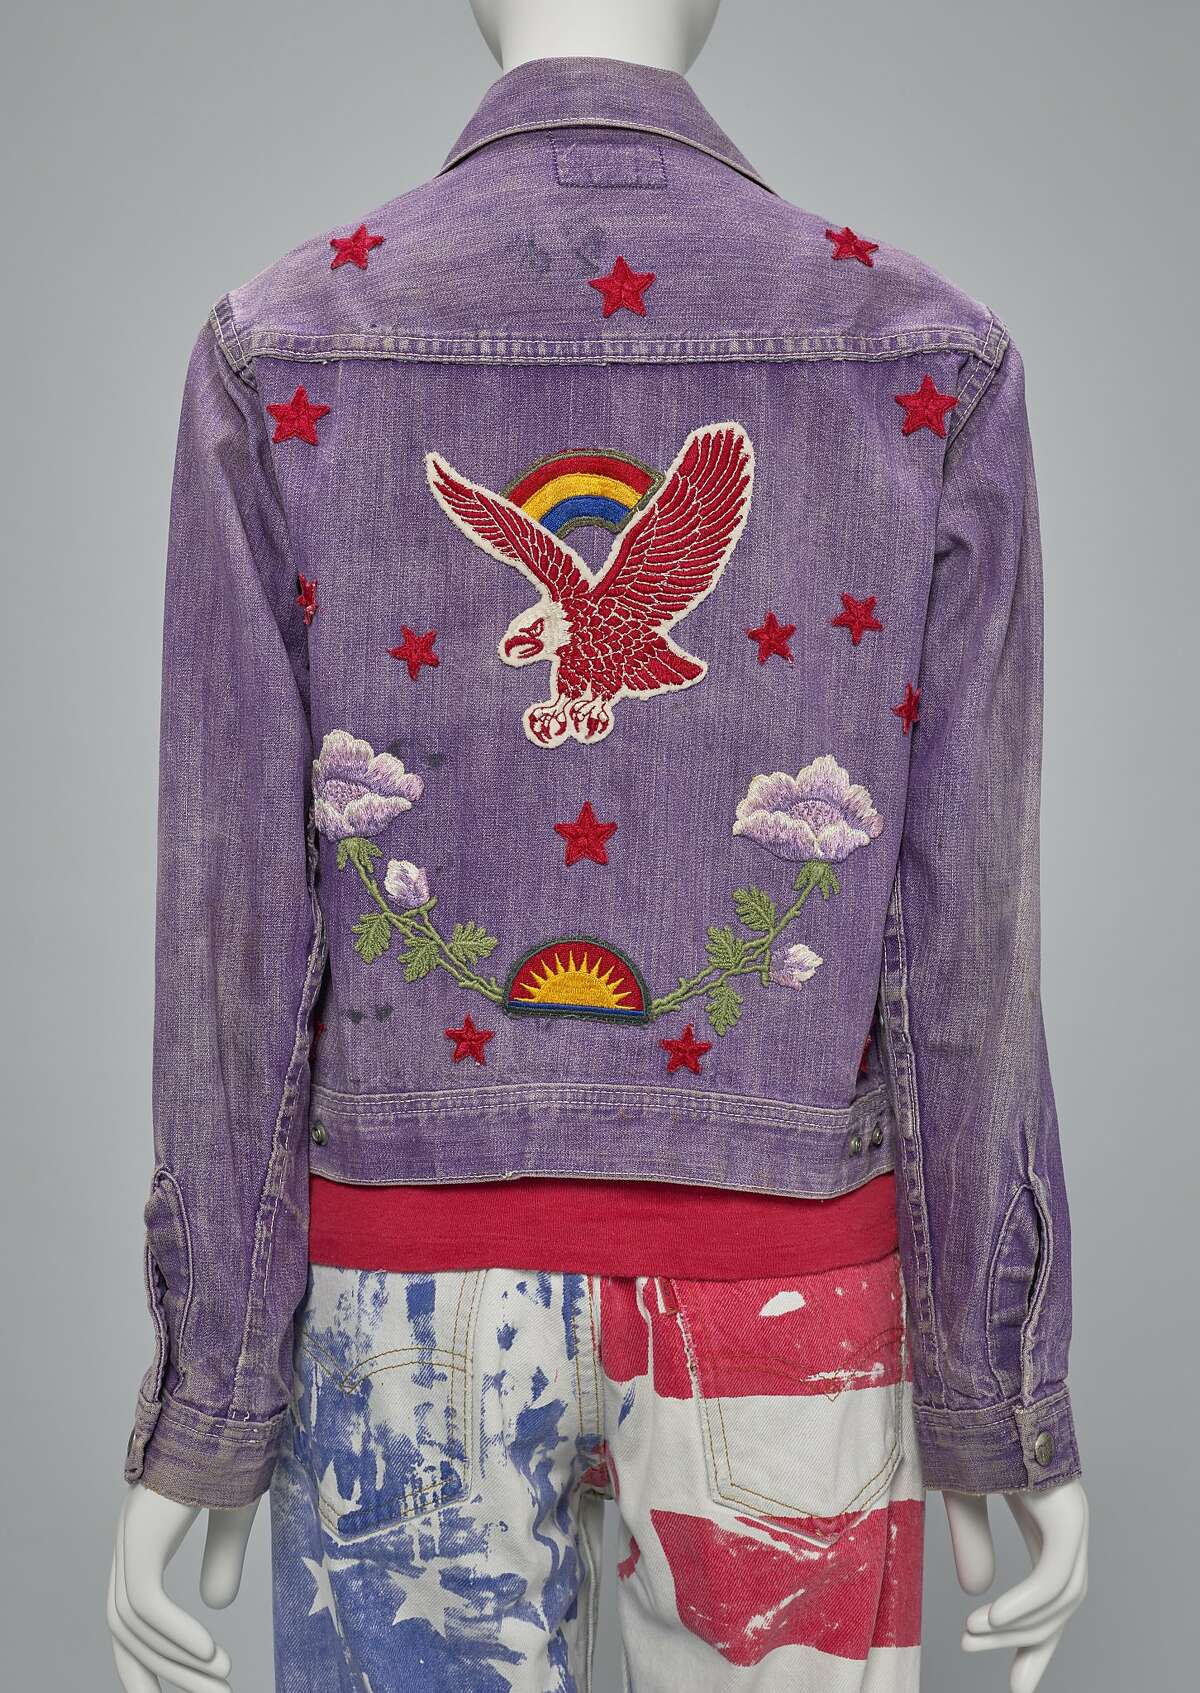 Helene Robertson, Customized "Farah of Texas" jacket ca. 1960s. Denim jacket with cotton patches and metal studs. Collection of the Artist. Pants, ca. 1960s. Silkscreened Levi�s denim jeans. Collection of Helene Robertson. Image Courtesy of the Fine Arts Museums of San Francisco